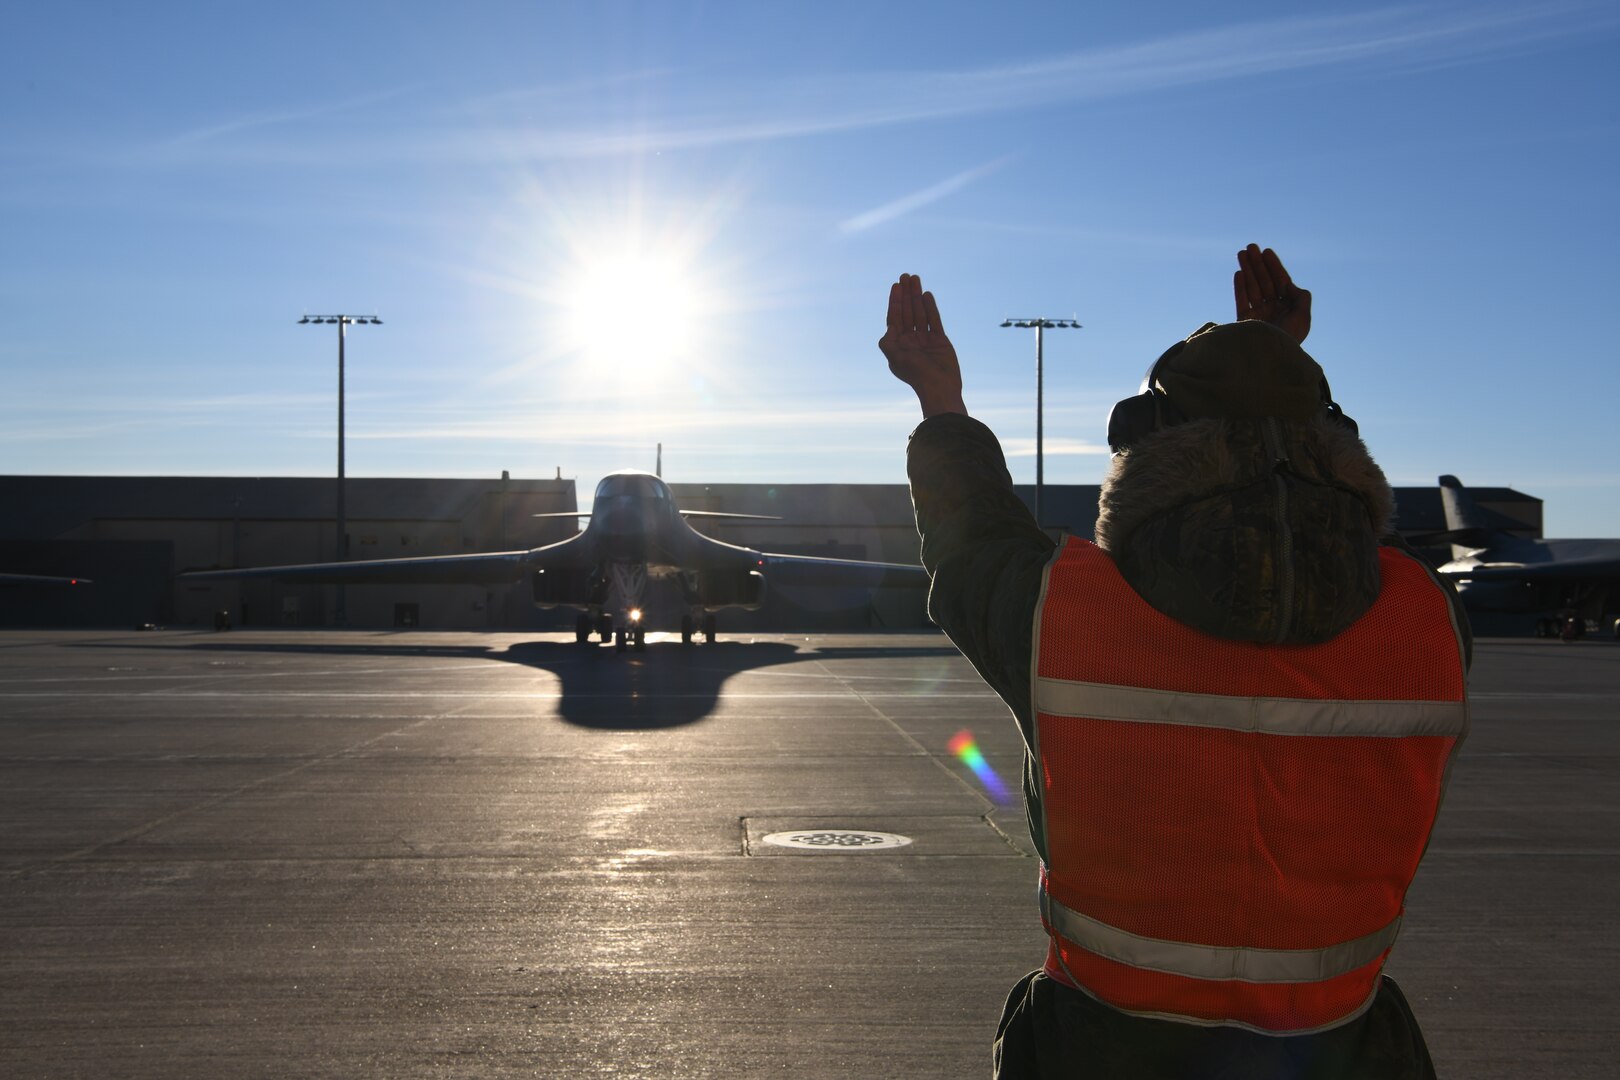 A maintainer assigned to the 28th Aircraft Maintenance Squadron marshals a U.S. Air Force B-1B Lancer prior to a Bomber Task Force deployment from Ellsworth Air Force Base, S.D., Dec. 3, 2020. Approximately 200 Airmen and several B-1s assigned to the 28th Bomb Wing at Ellsworth deployed to Andersen AFB, Guam, to support Pacific Air Forces’ strategic deterrence missions to reinforce the rules-based order in the Indo-Pacific region. (U.S. Air Force photo by Staff Sgt. Nicolas Z. Erwin)